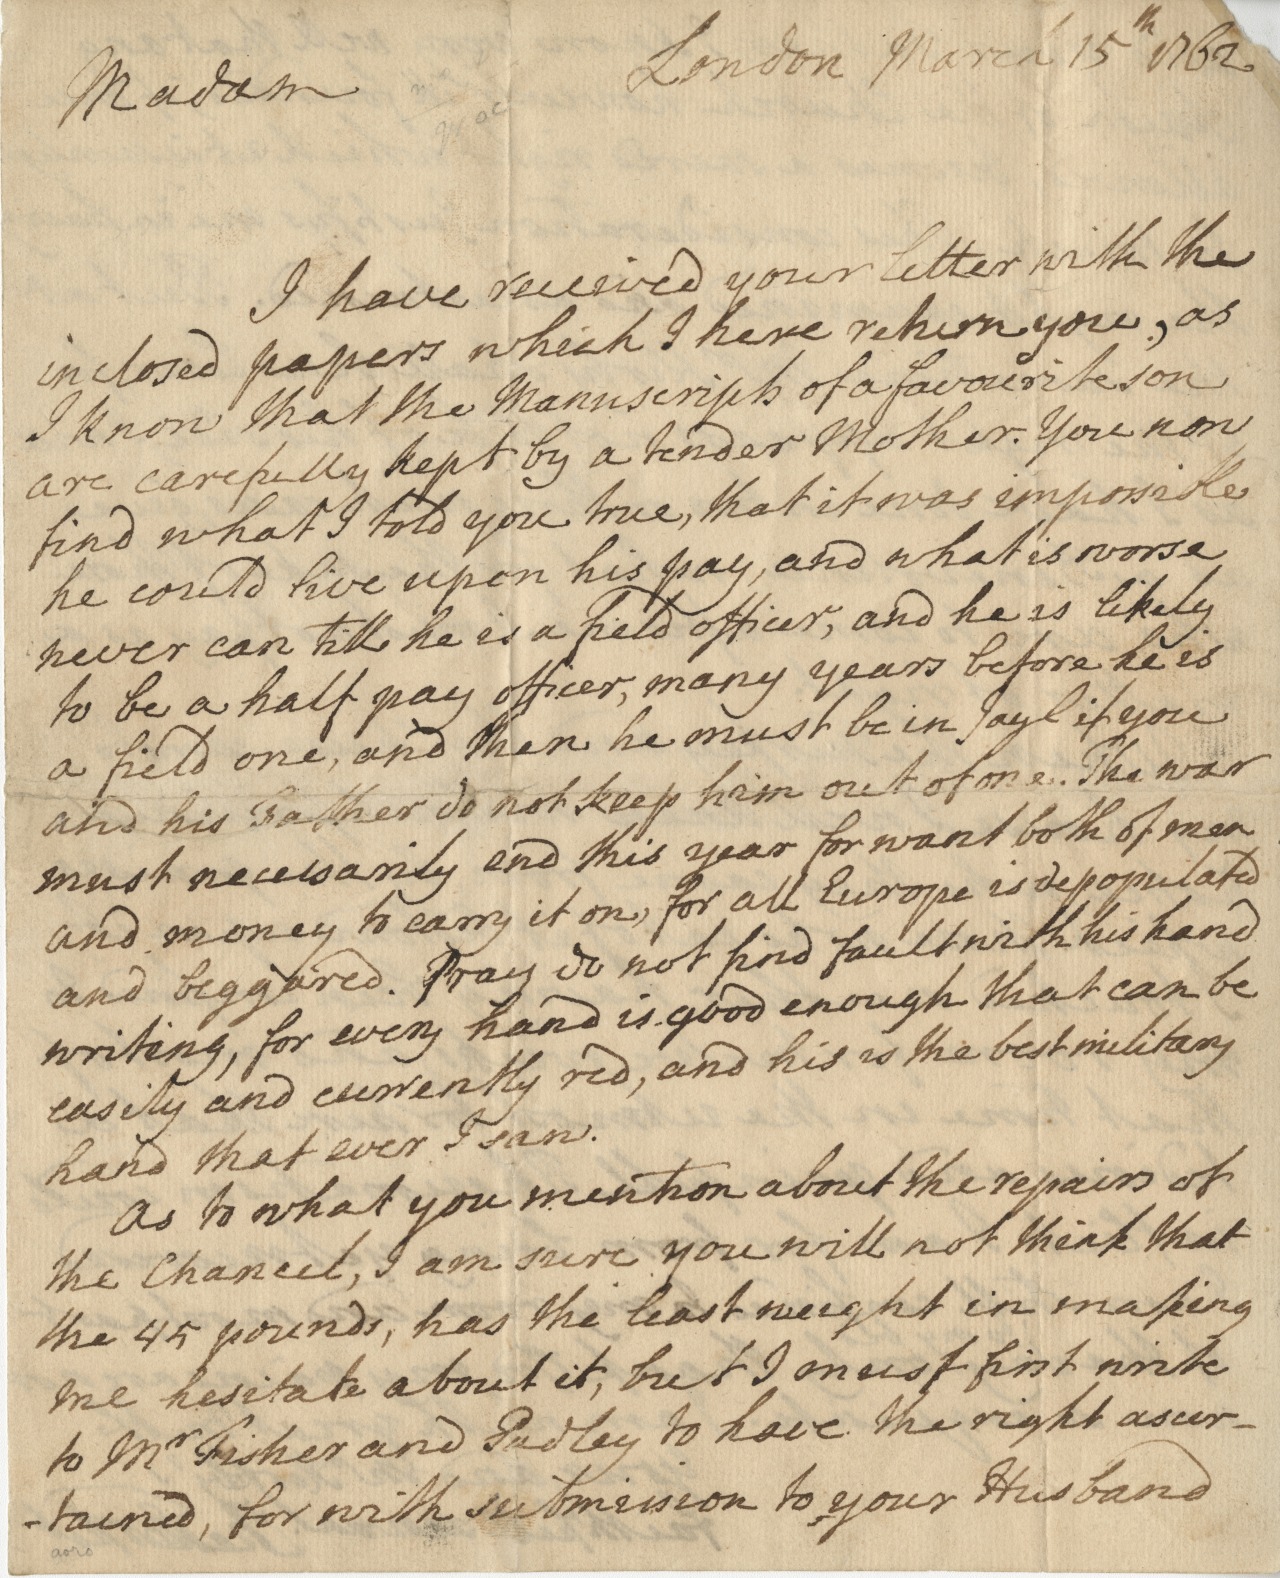 lord chesterfield letter to his son